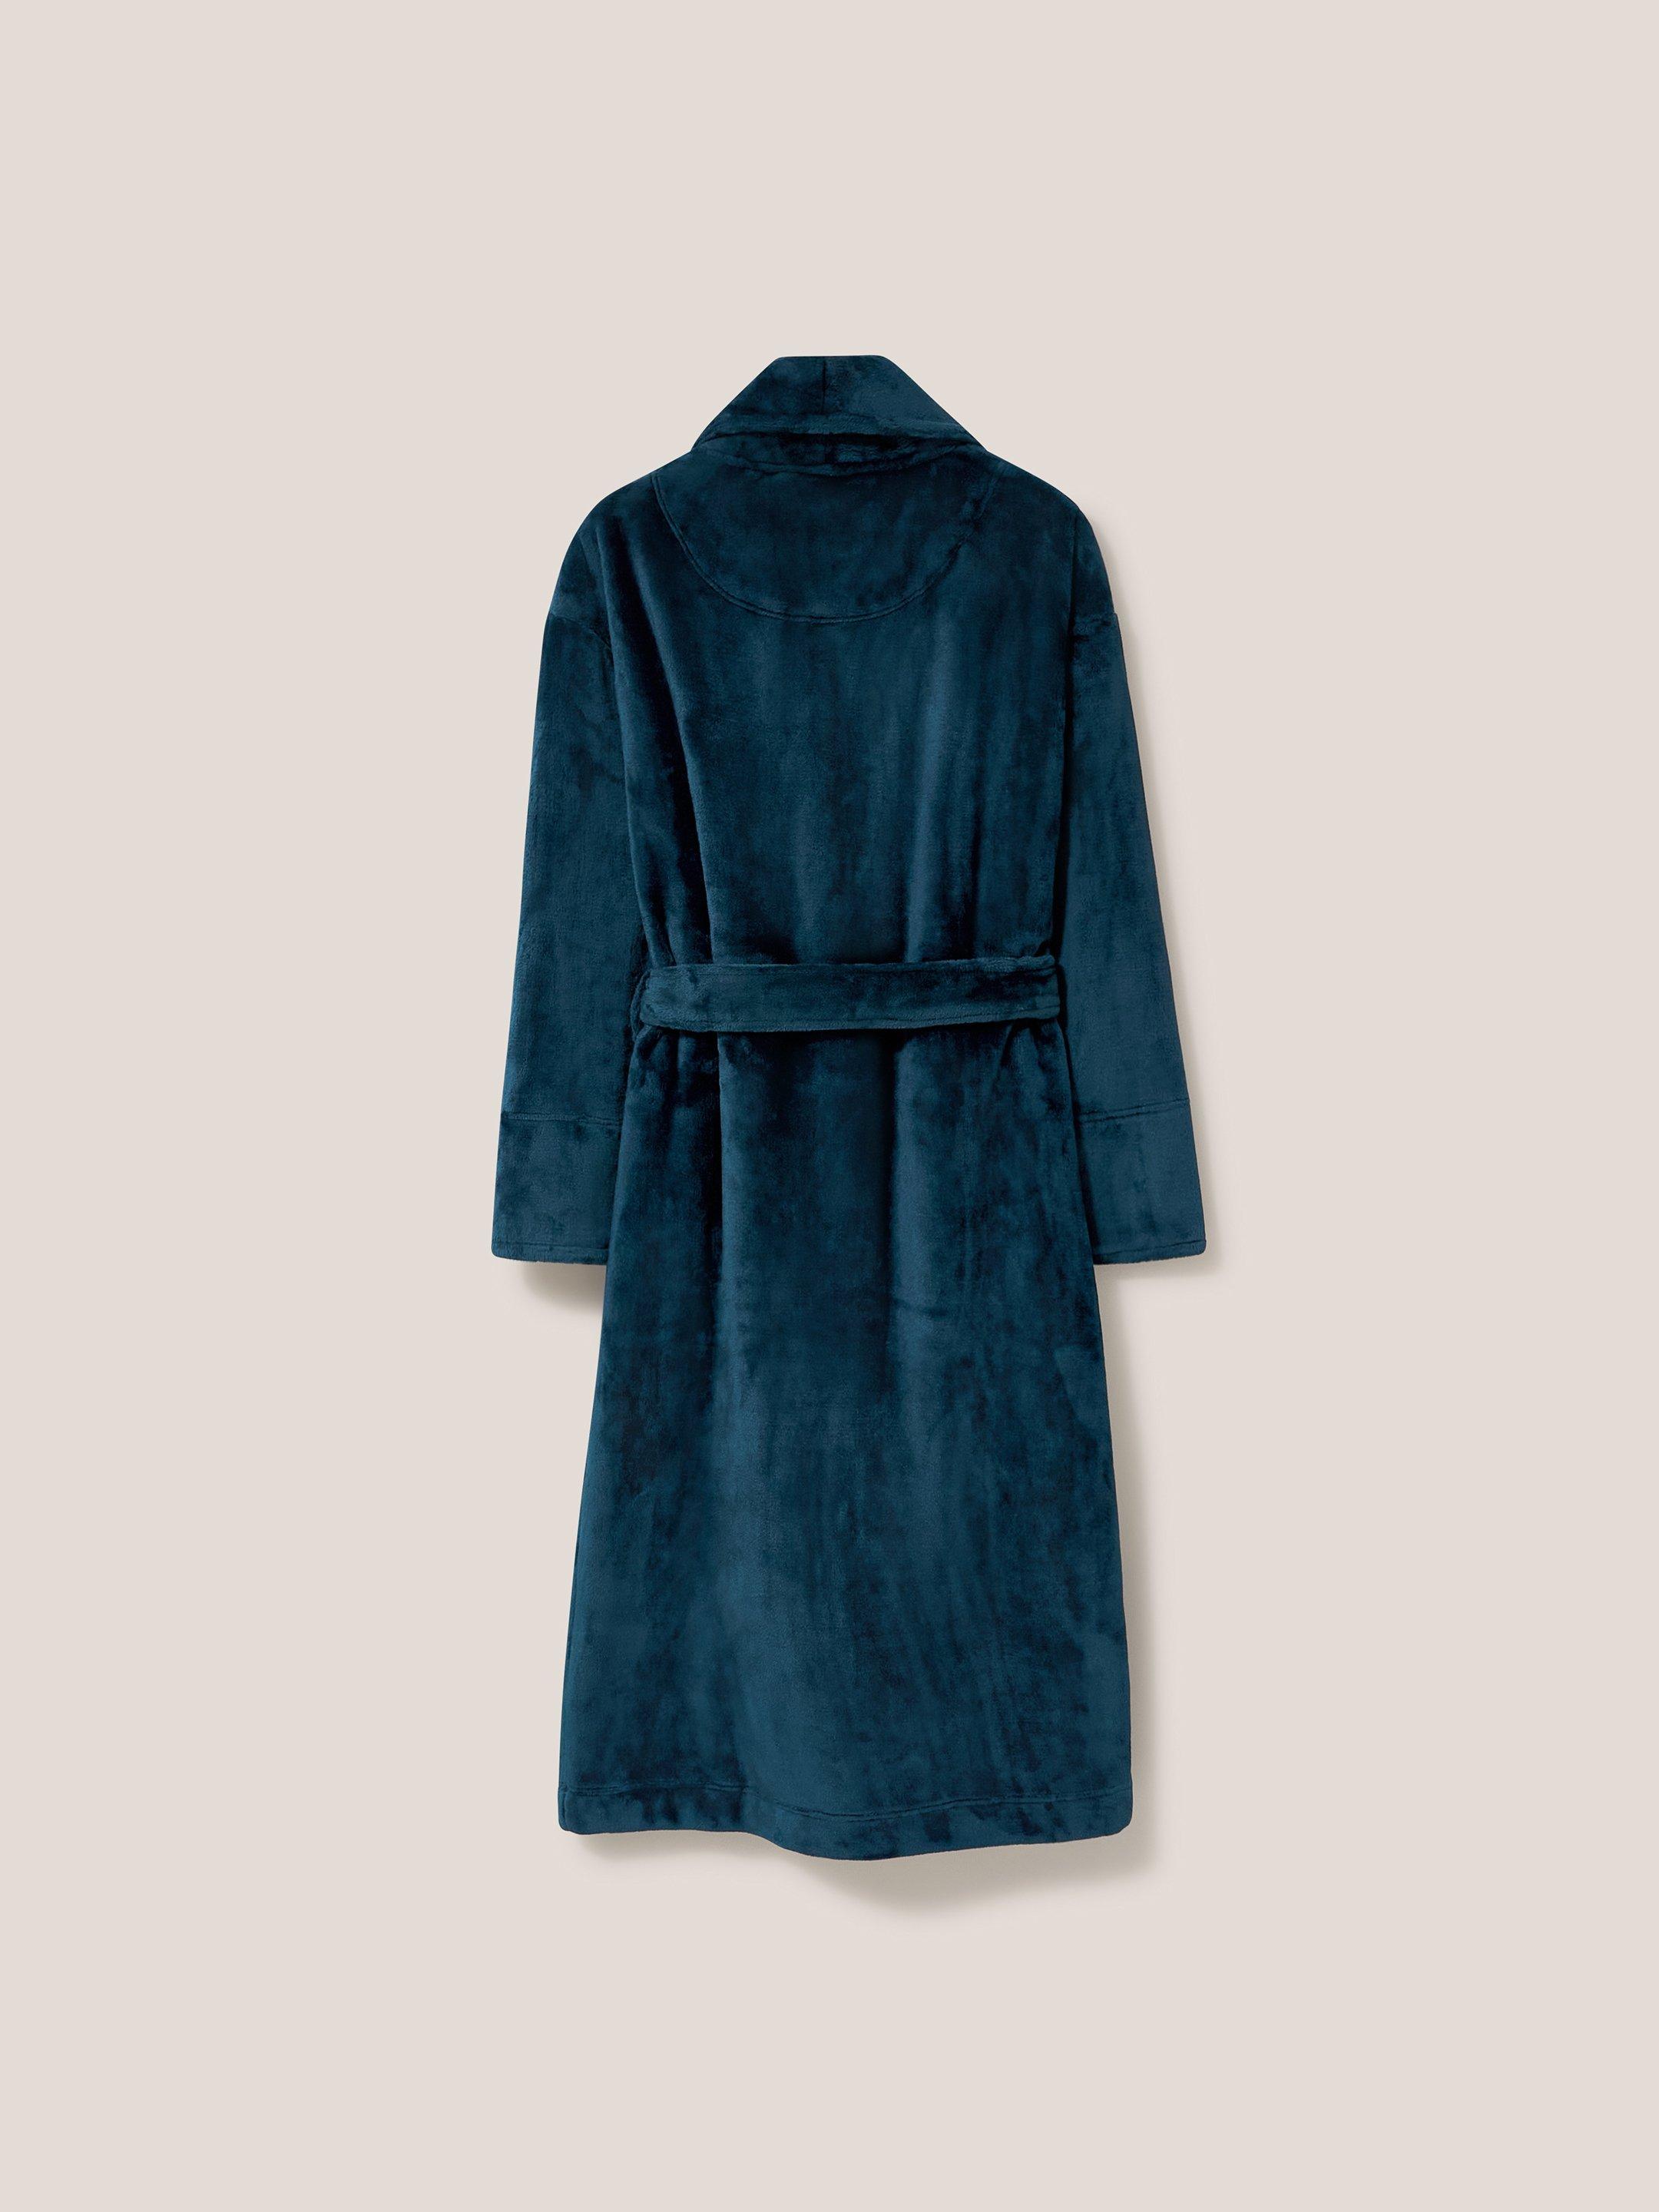 Clover Cosy Dressing Gown in DK TEAL - FLAT BACK